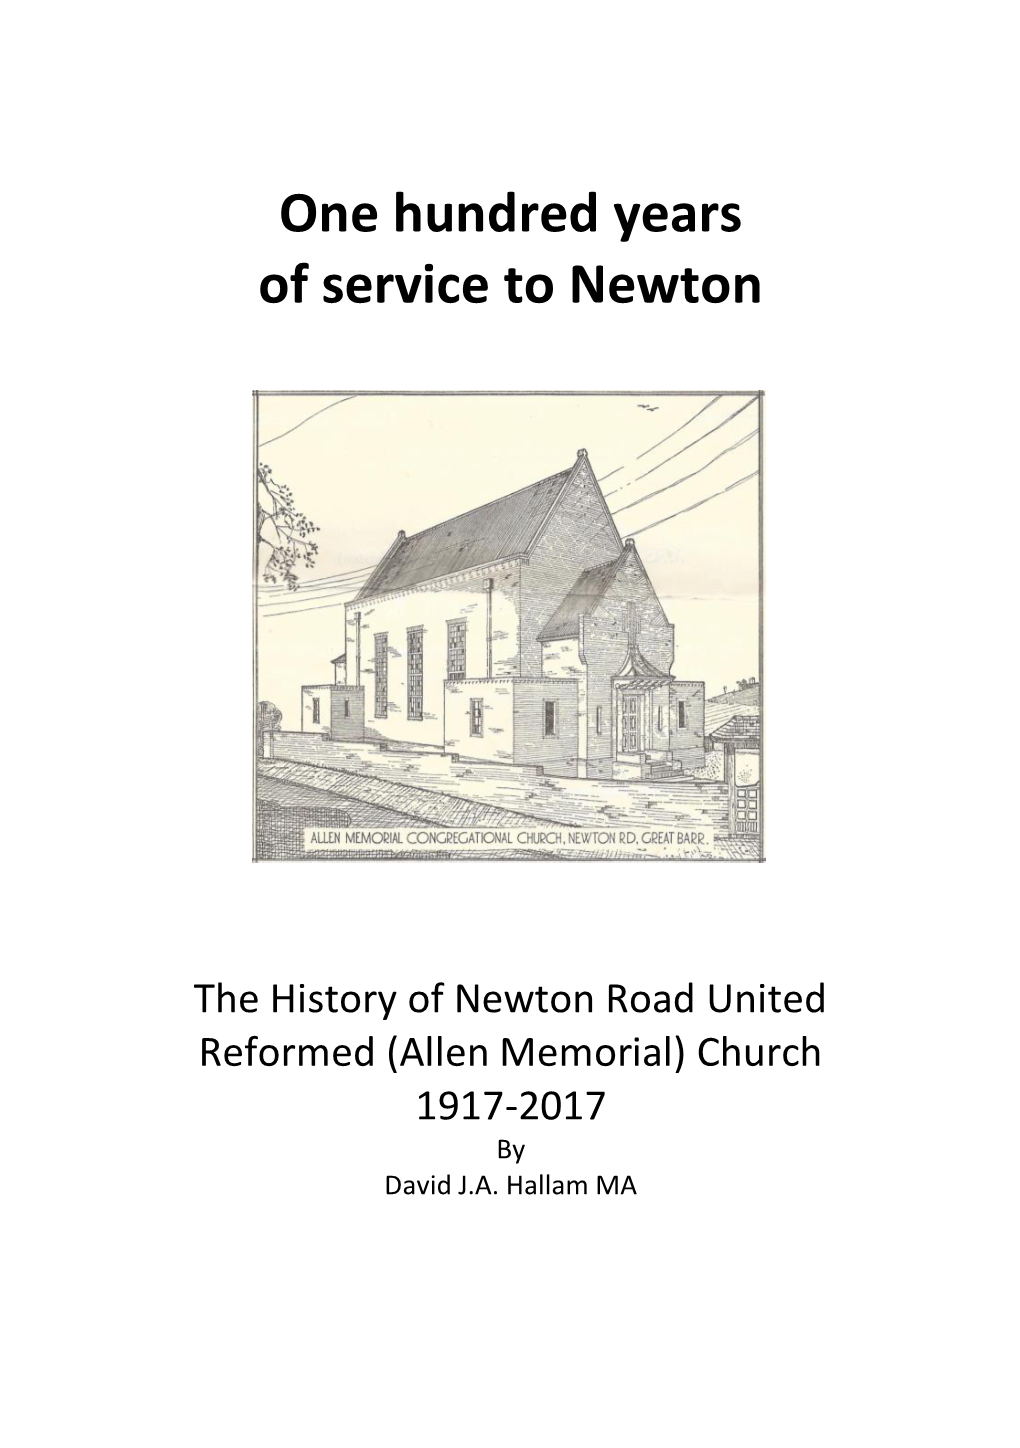 One Hundred Years of Service to Newton